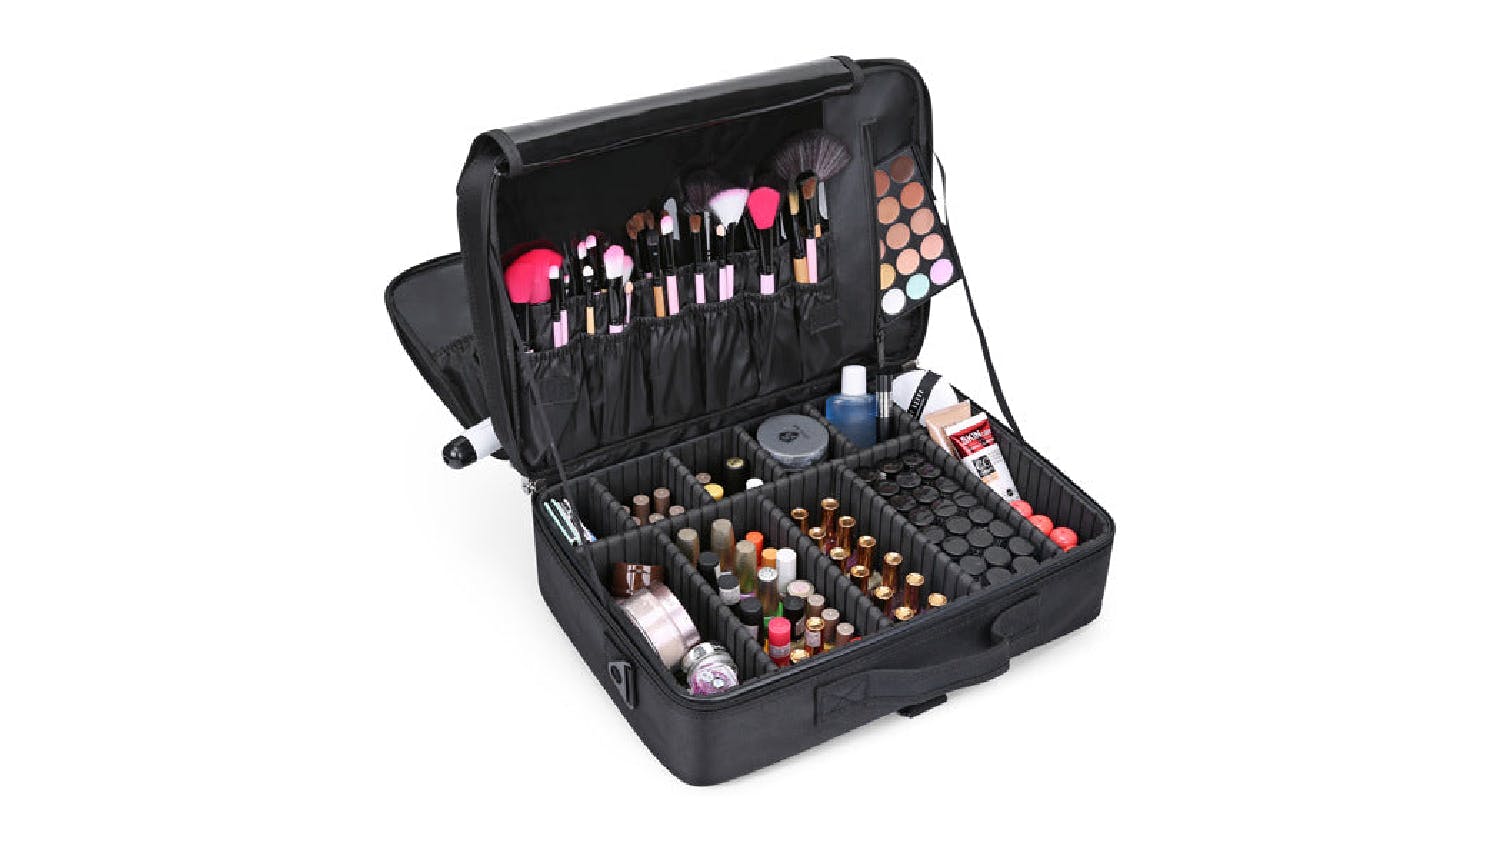 Kmall Professional Portable Make-Up Storage Case with Dividers, Shoulder Strap